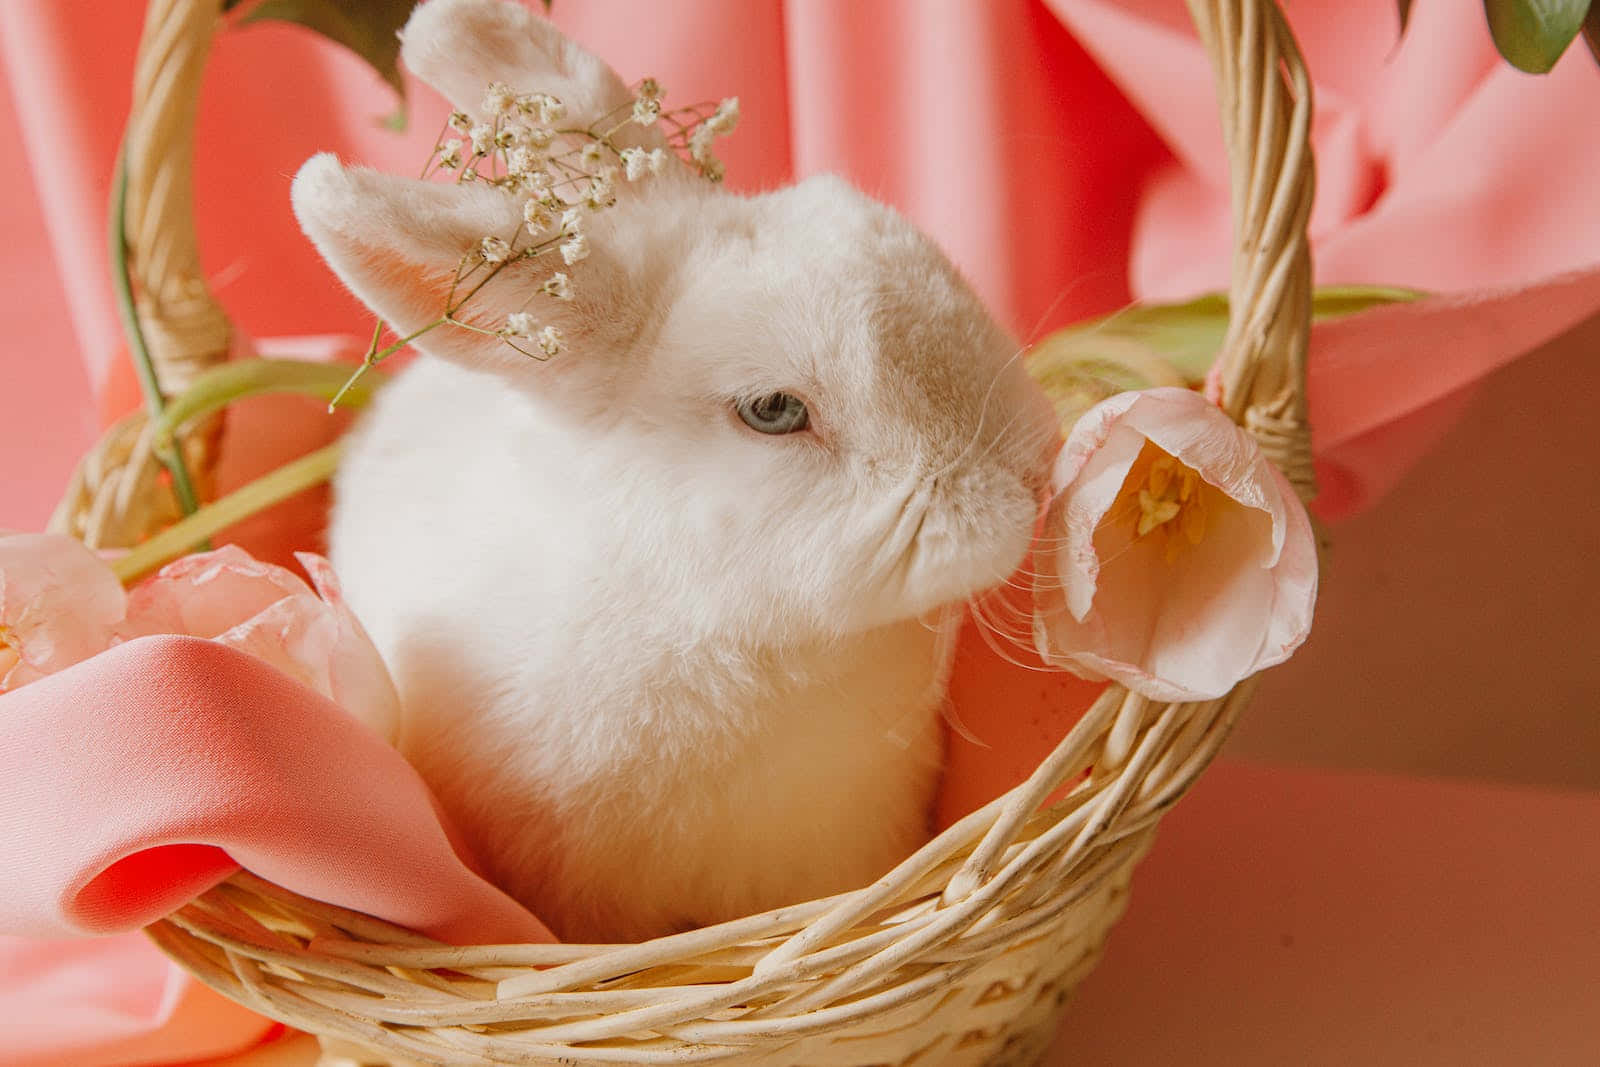 A White Rabbit In A Basket With Flowers Wallpaper